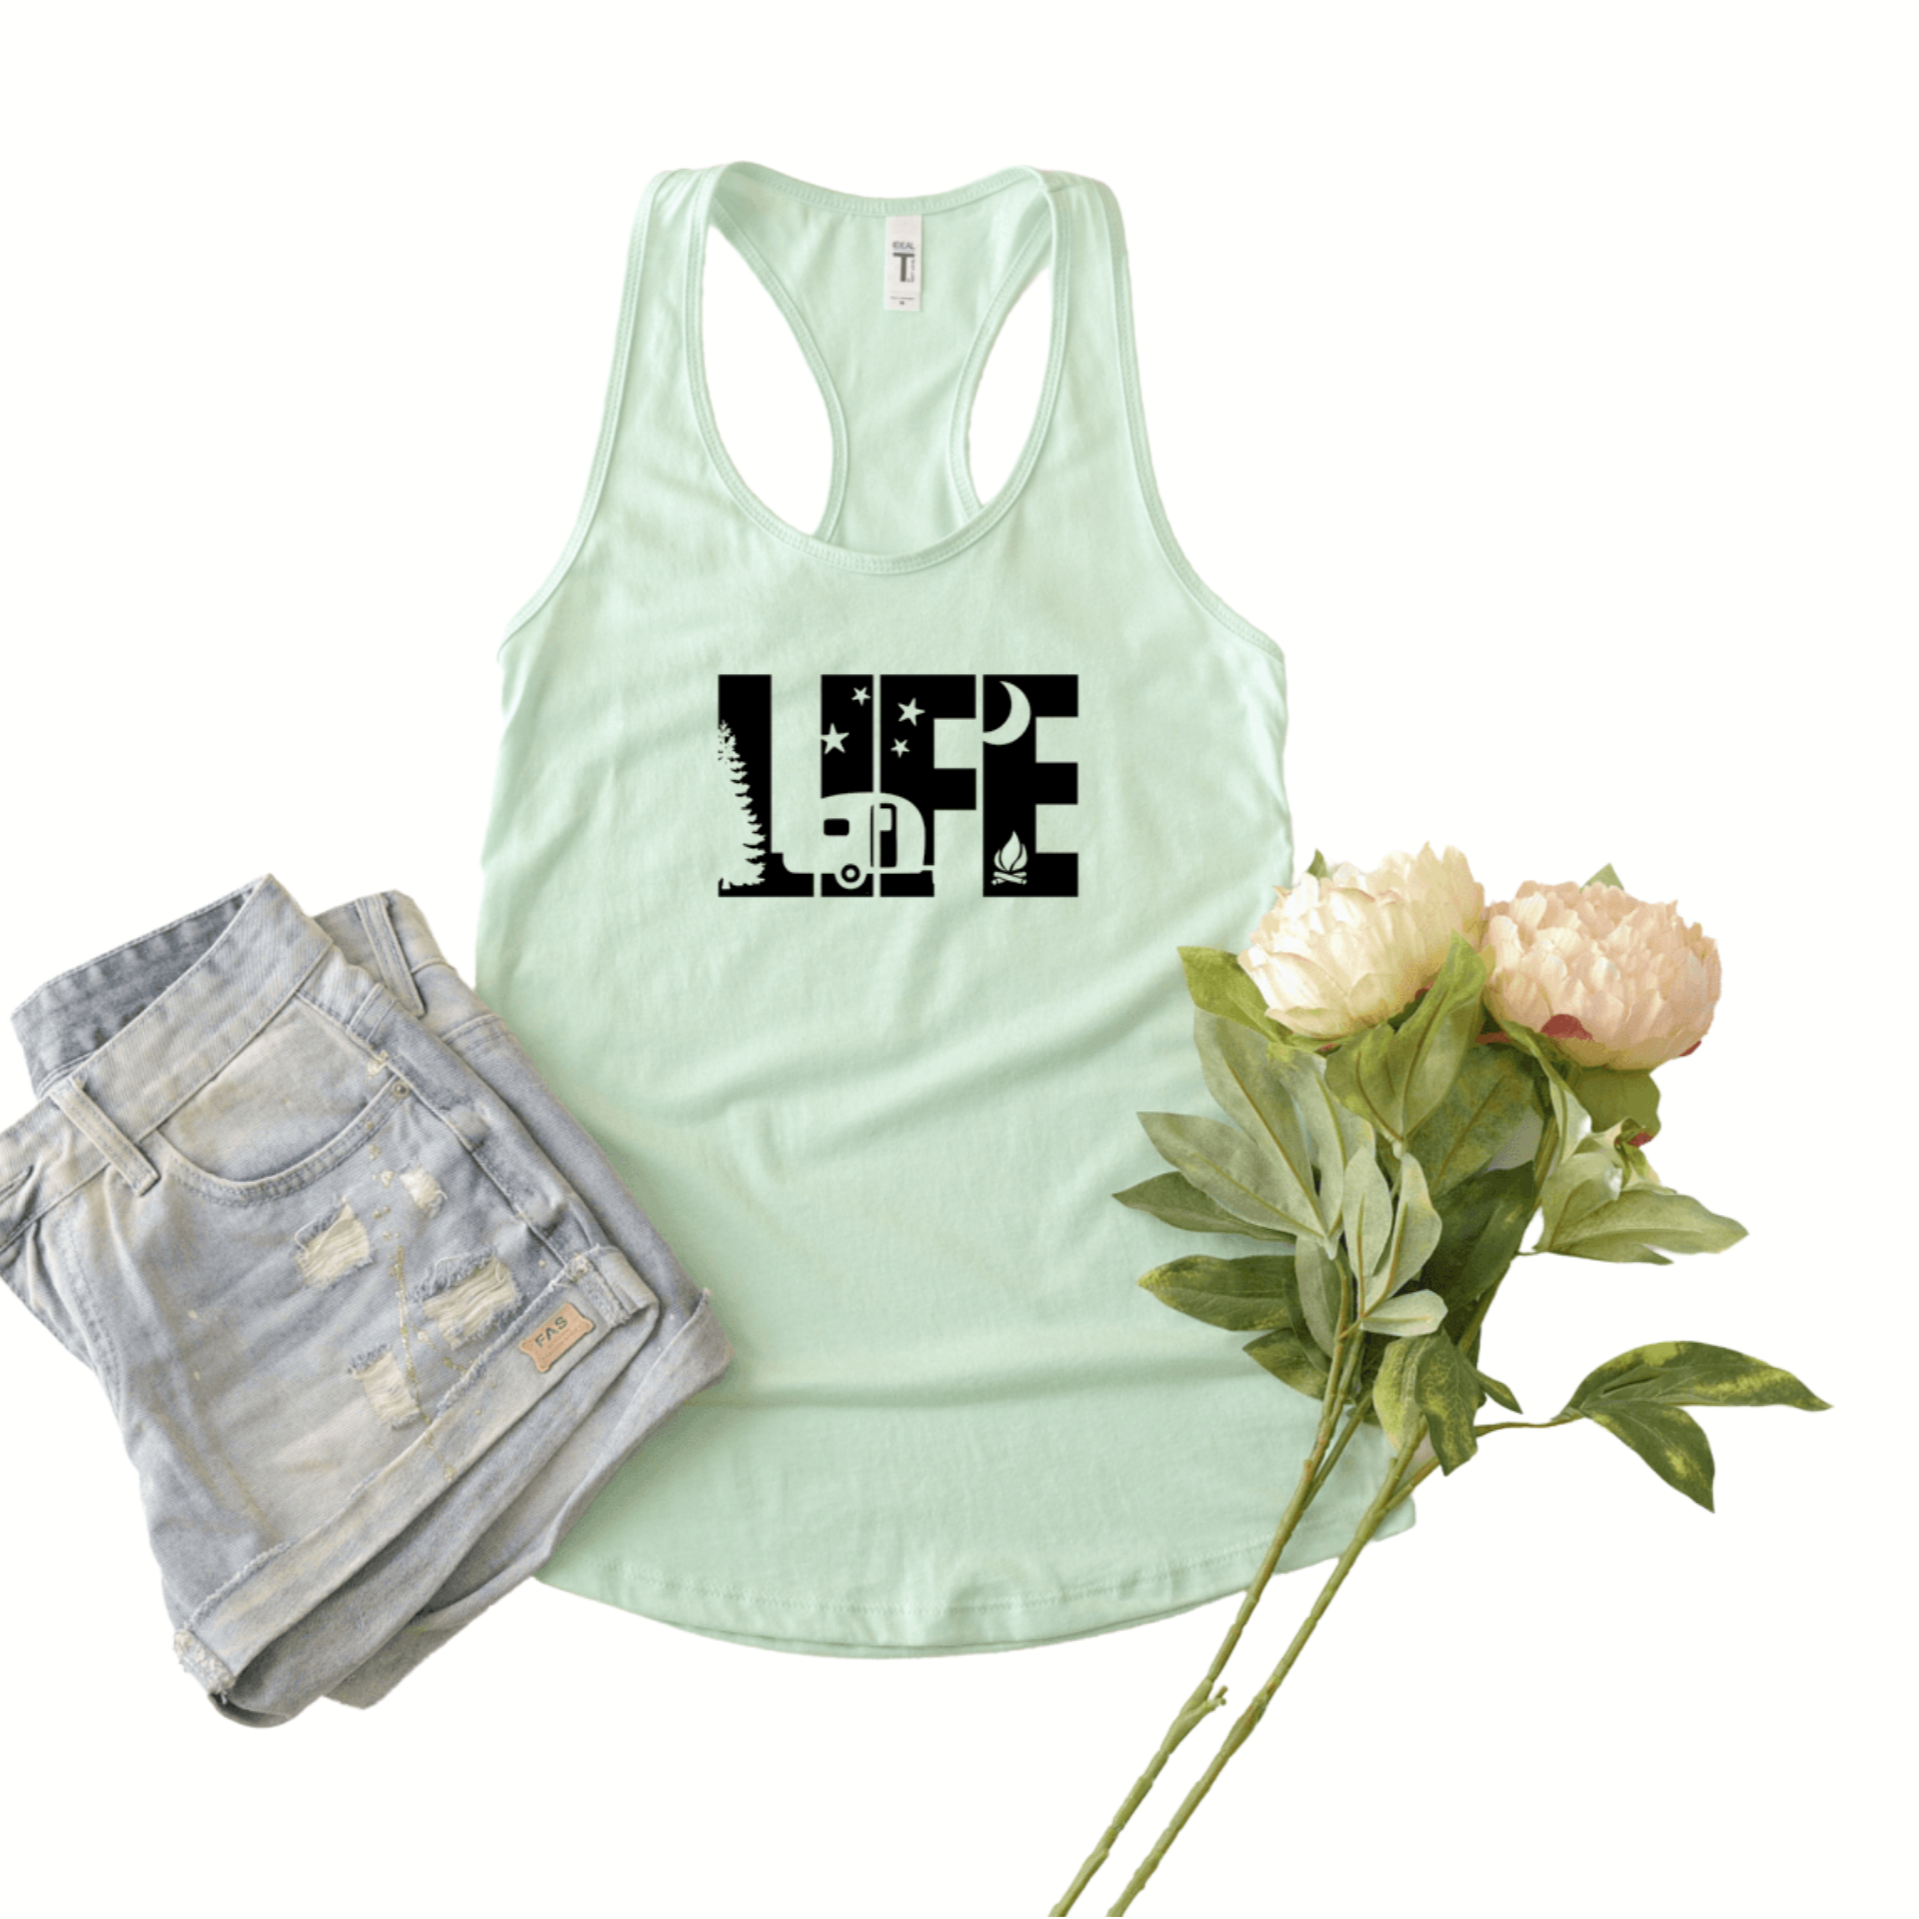 Next level 1533 mint tank top with LIFE in black with a night skyline, tree, and camping trailer cut out of the letters.